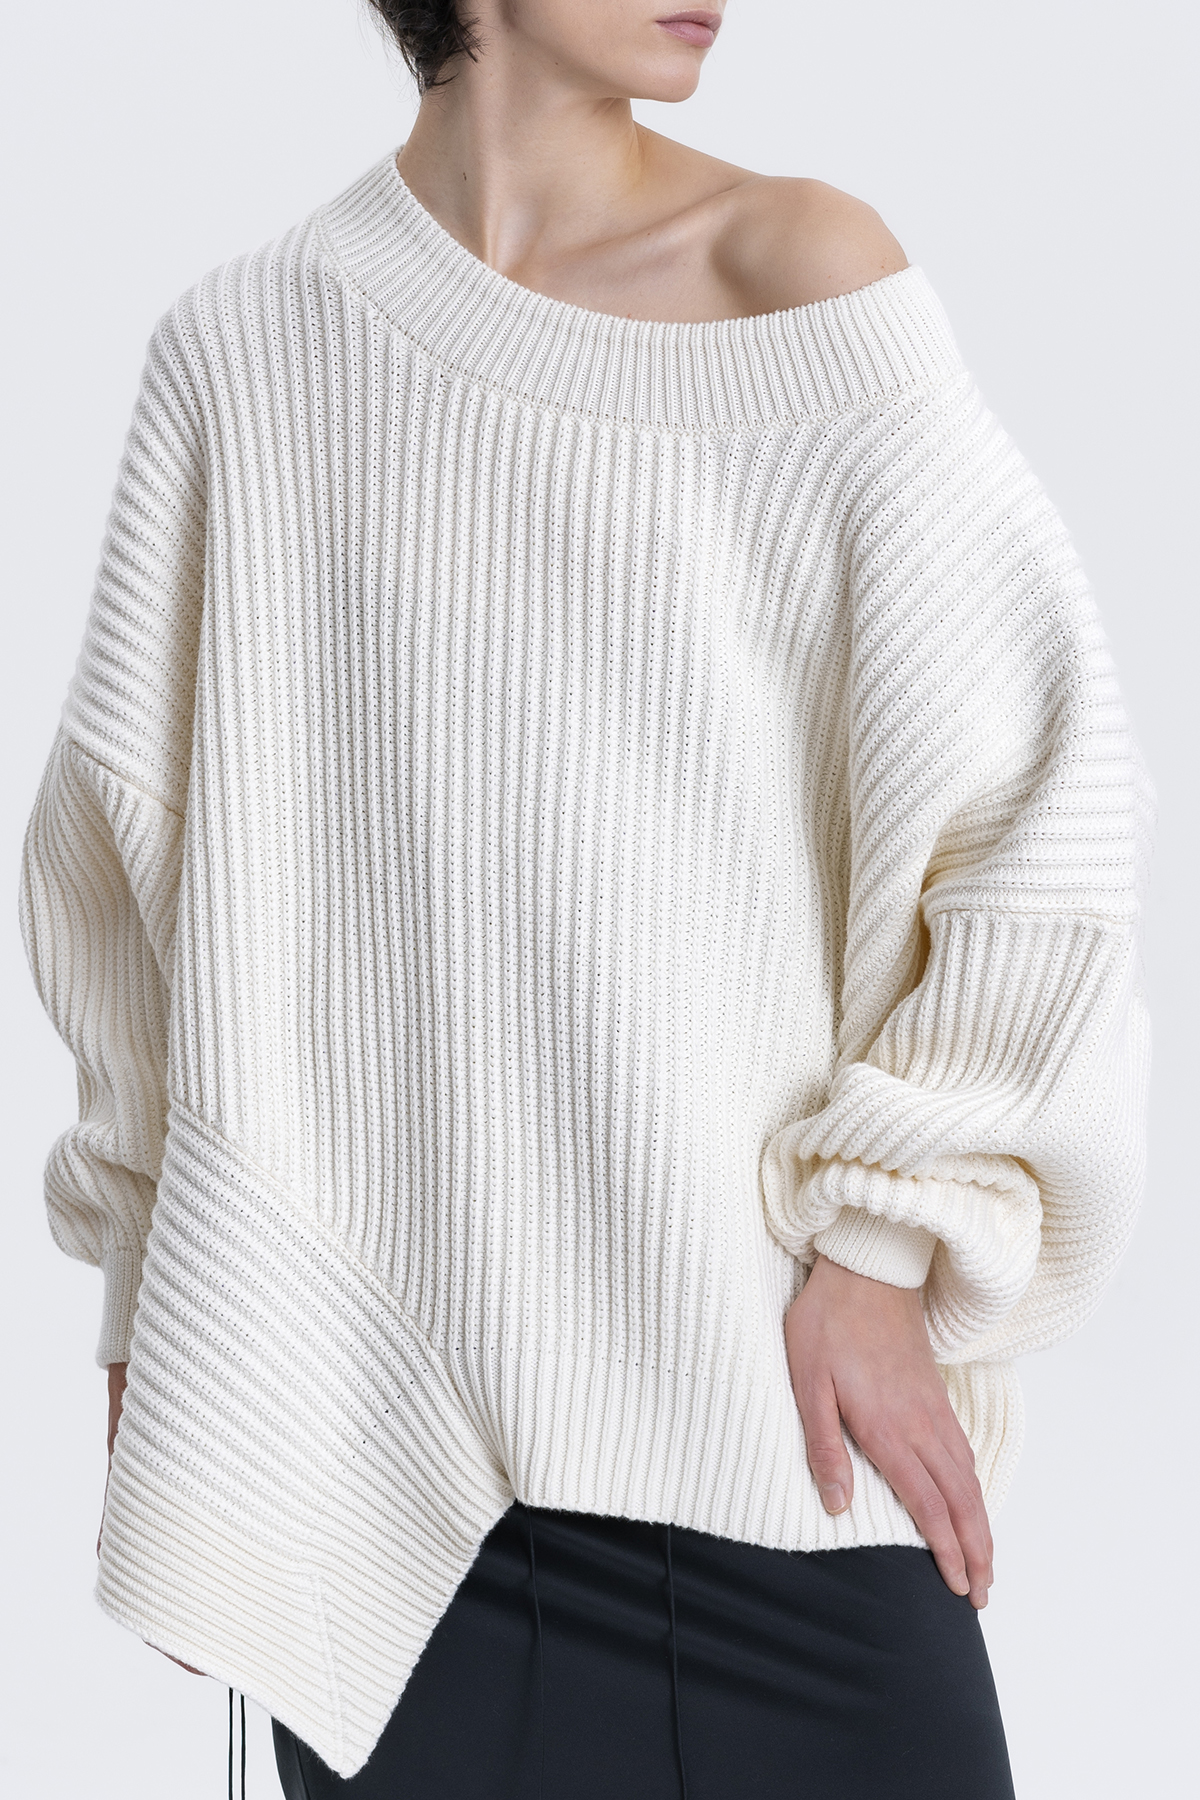  Knitted jumper with curved hem